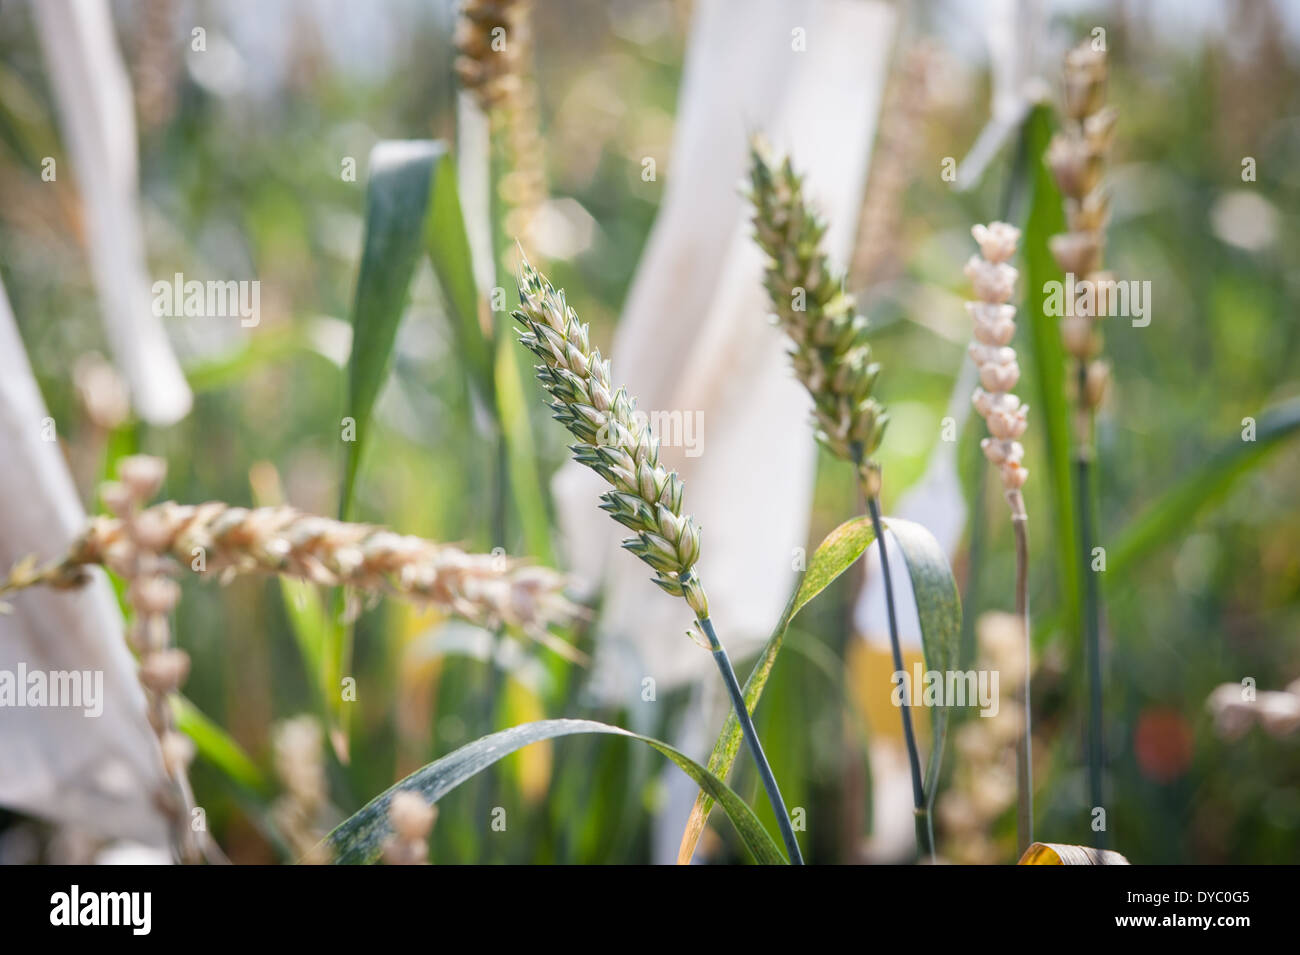 Wheat going to head or seed in a research greenhouse complex Stock Photo